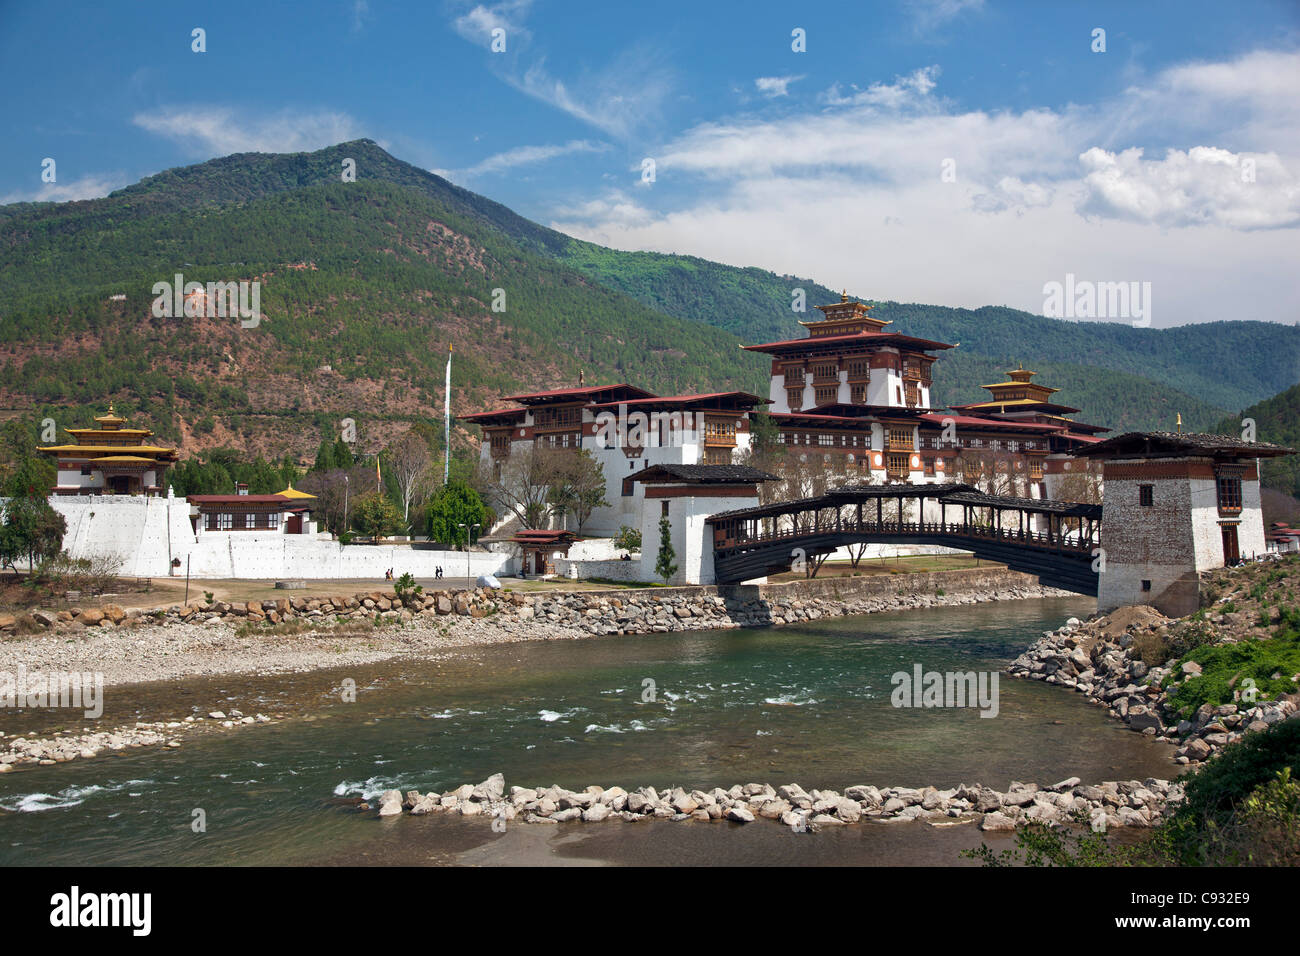 The 17th century Punakha Dzong is the second oldest and second largest dzong in Bhutan. Stock Photo